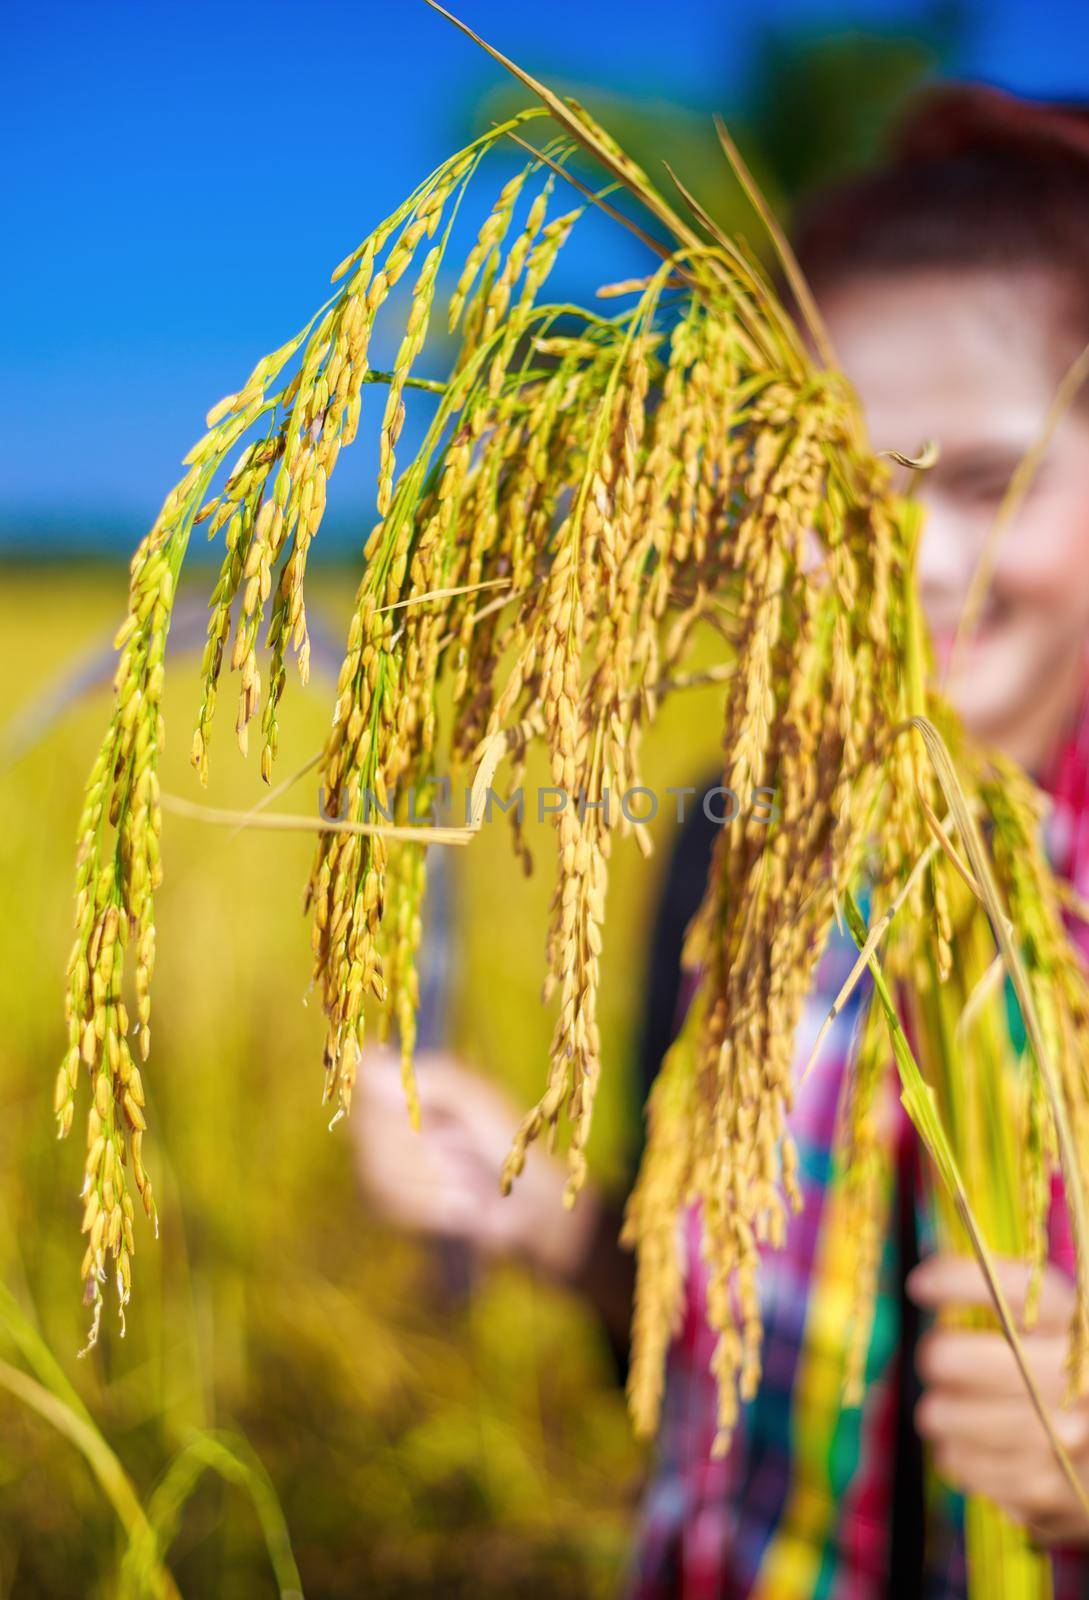 golden rice in hand of farmer woman, Thailand